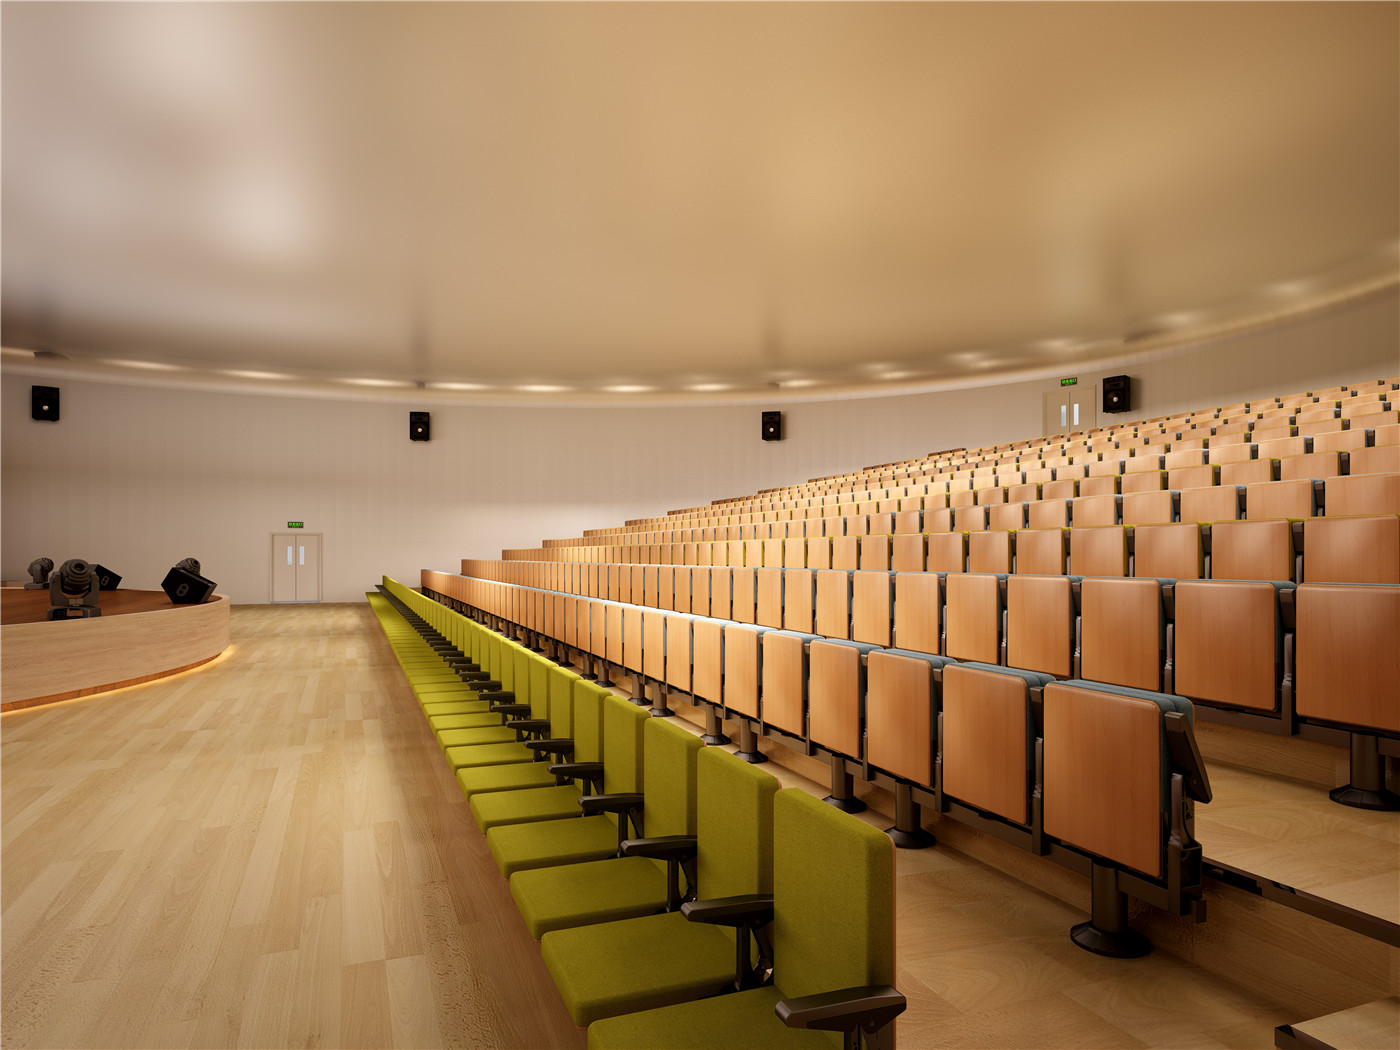 Enhance the Audience Experience with Superior Auditorium Seating Solutions from Top Manufacturers6